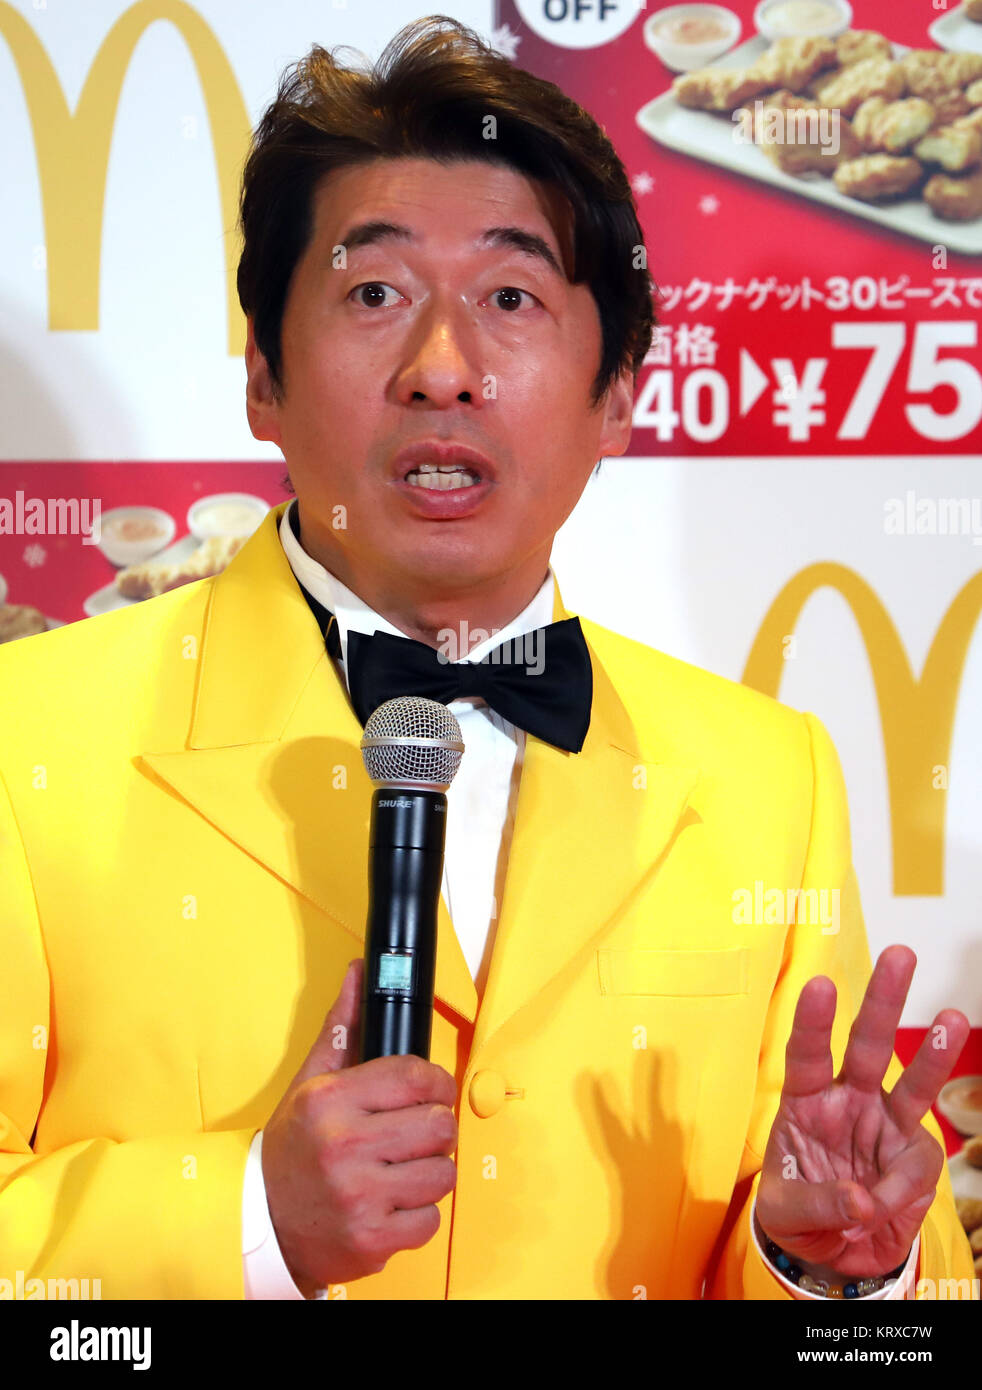 Tokyo, Japan. 21st Dec, 2017. Japan's comedy trio Dacho-Club member Jimon Terakado attends a promotional event of McDonald's Japan's Chicken McNuggets in Tokyo on Thursday, December 21, 2017. McDonald's Japan will have a campaign for their Chicken McNuggets with a discount price and special flabored dipping saurces. Credit: Yoshio Tsunoda/AFLO/Alamy Live News Stock Photo